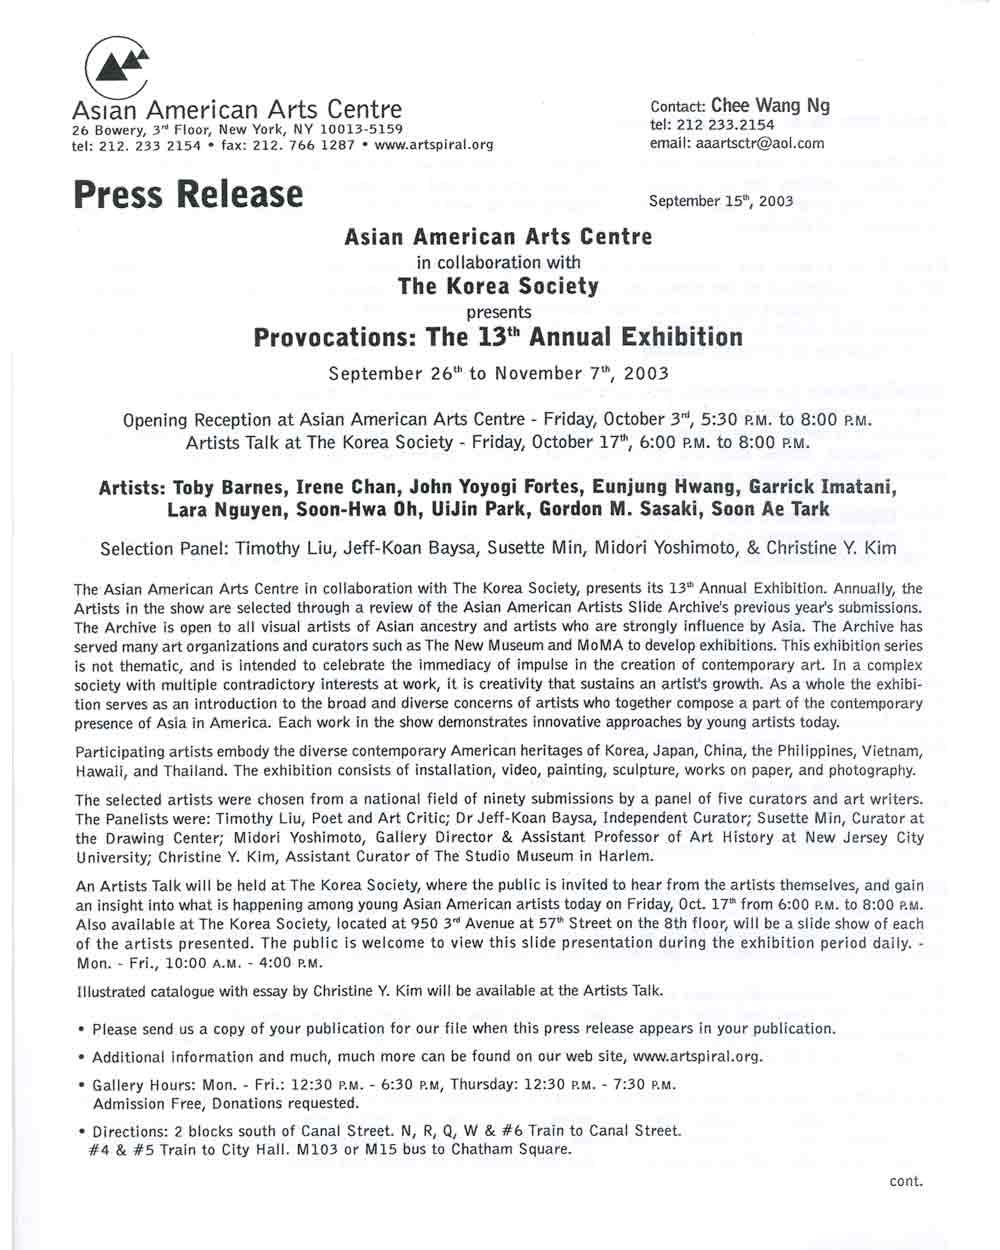 Provocations, press release, pg 1